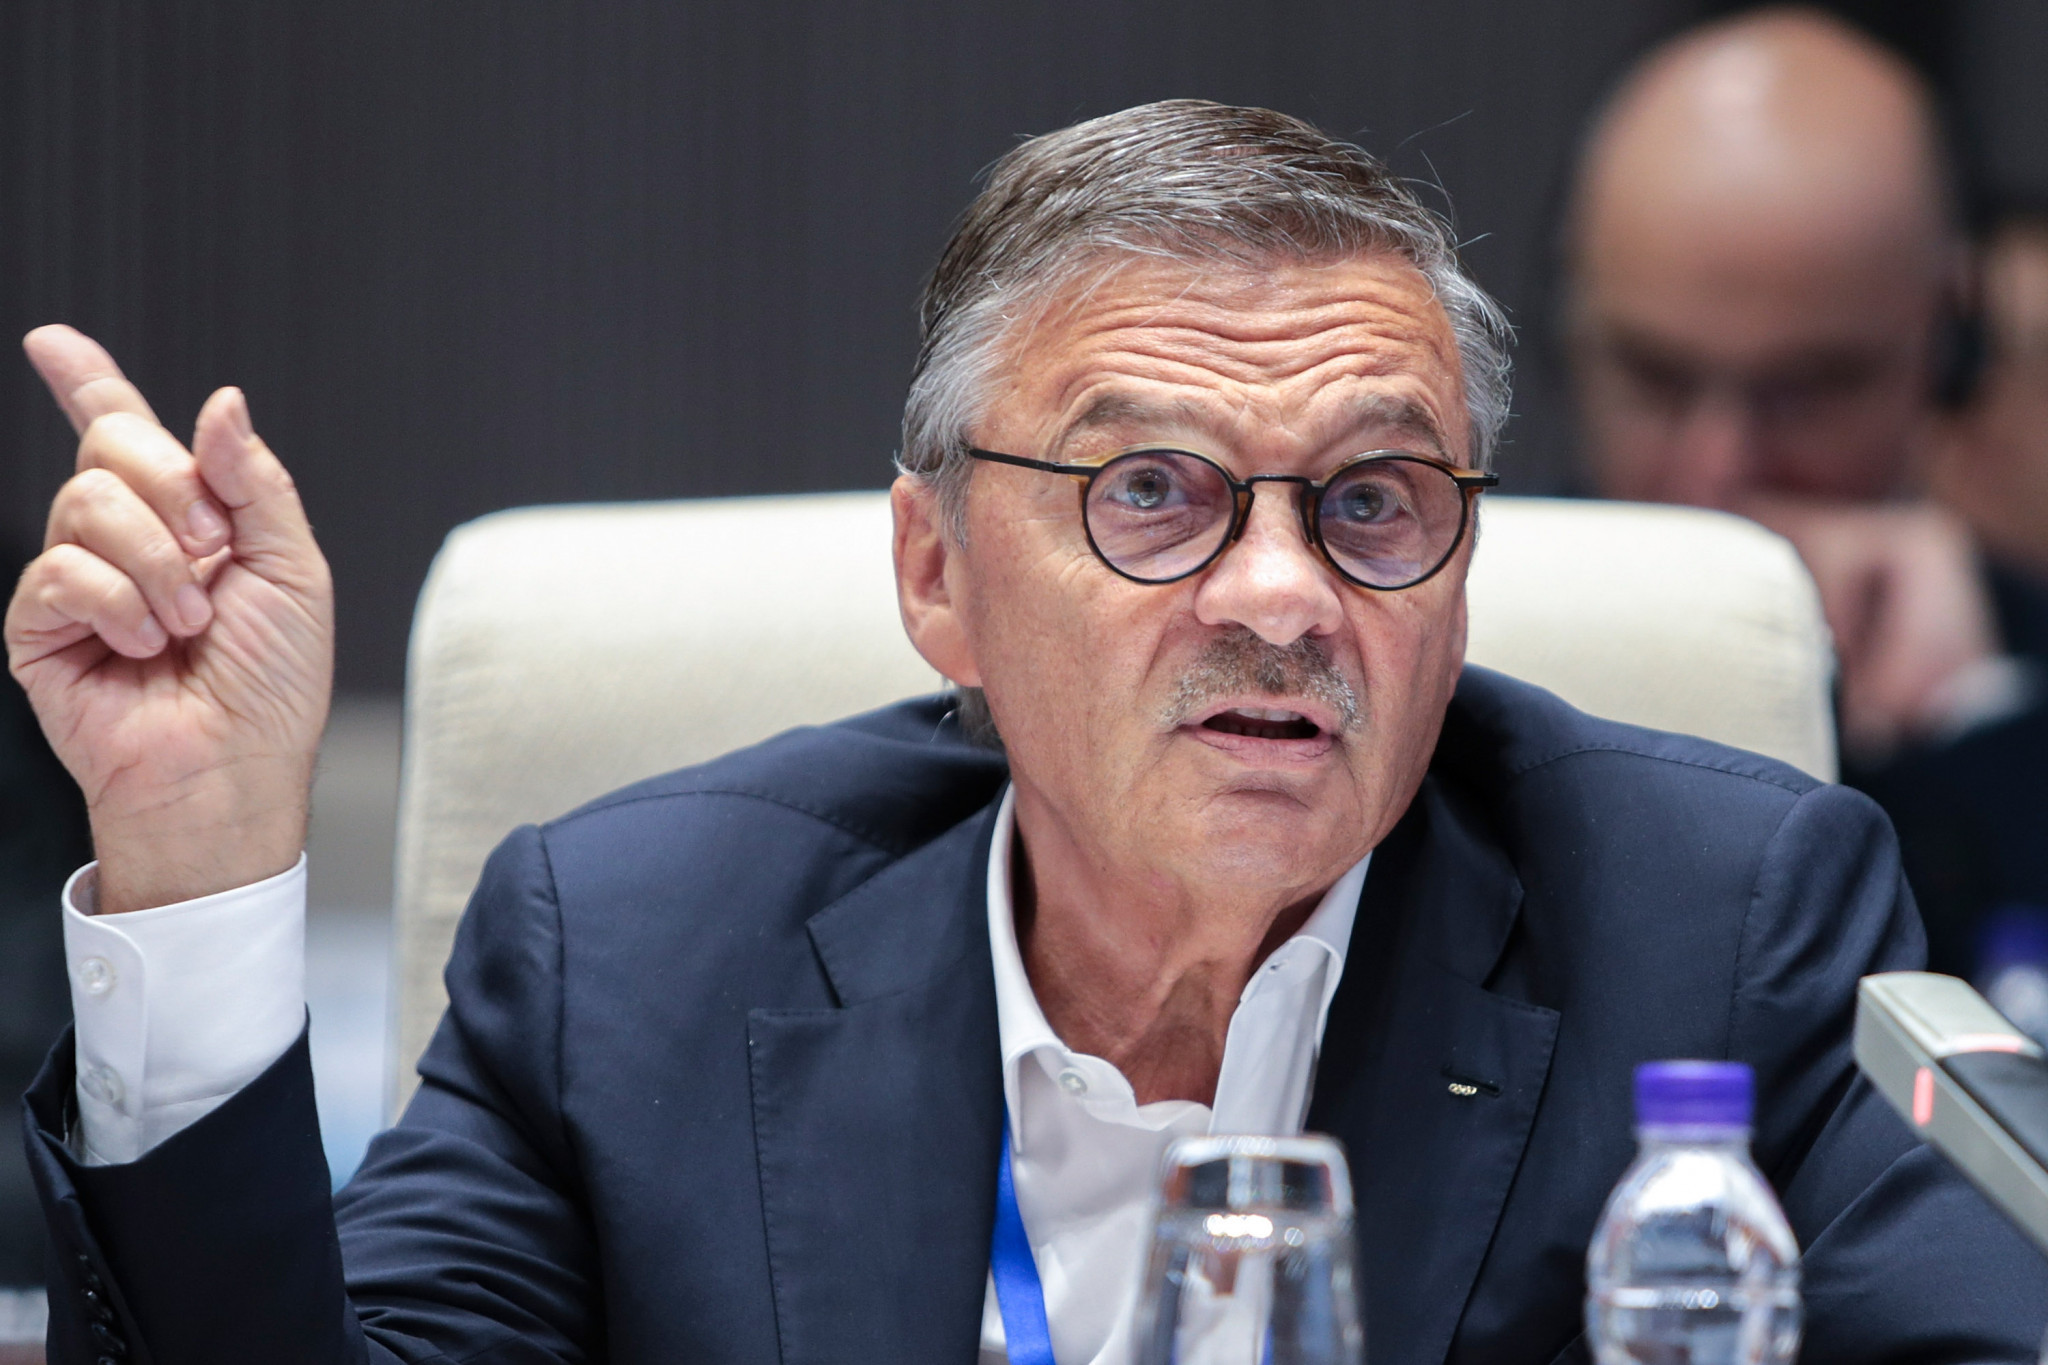 IIHF President René Fasel described the CAS ruling as "harsh" ©Getty Images